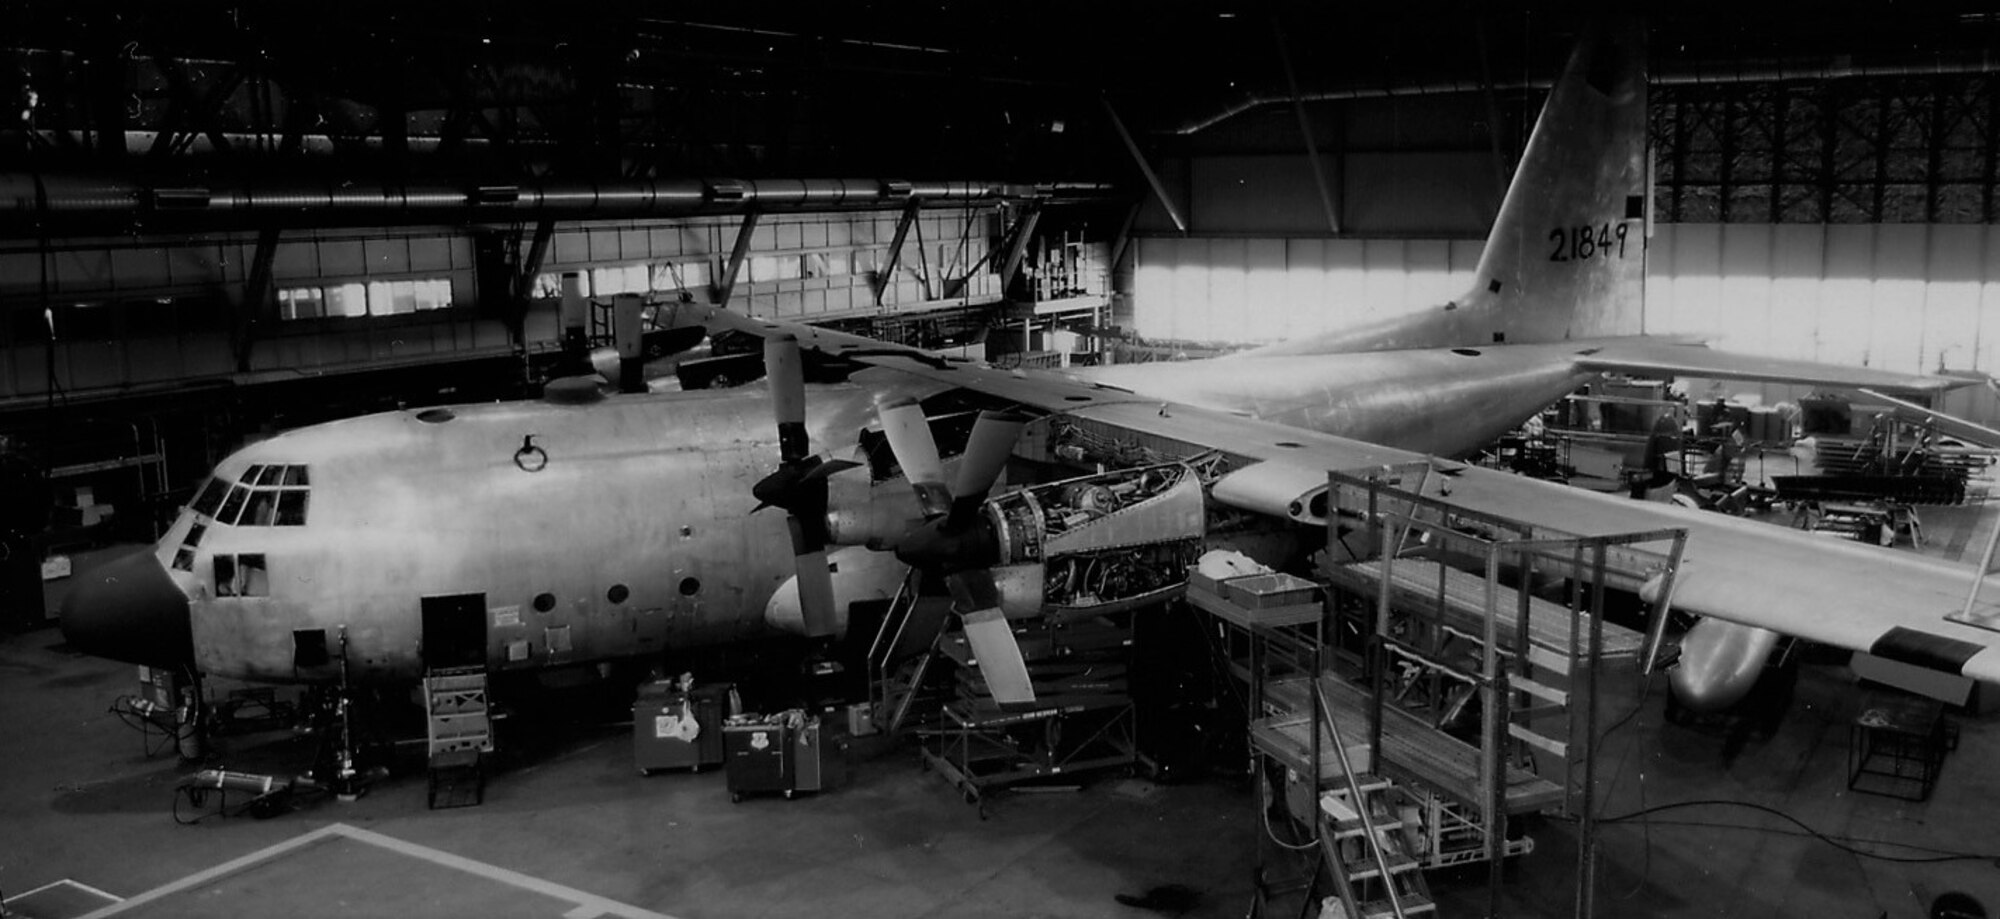 A C-130 undergoing depot maintenance at the Ogden ALC, Hill AFB, Utah. The Ogden ALC has performed depot maintenance on the C-130 since 1988.